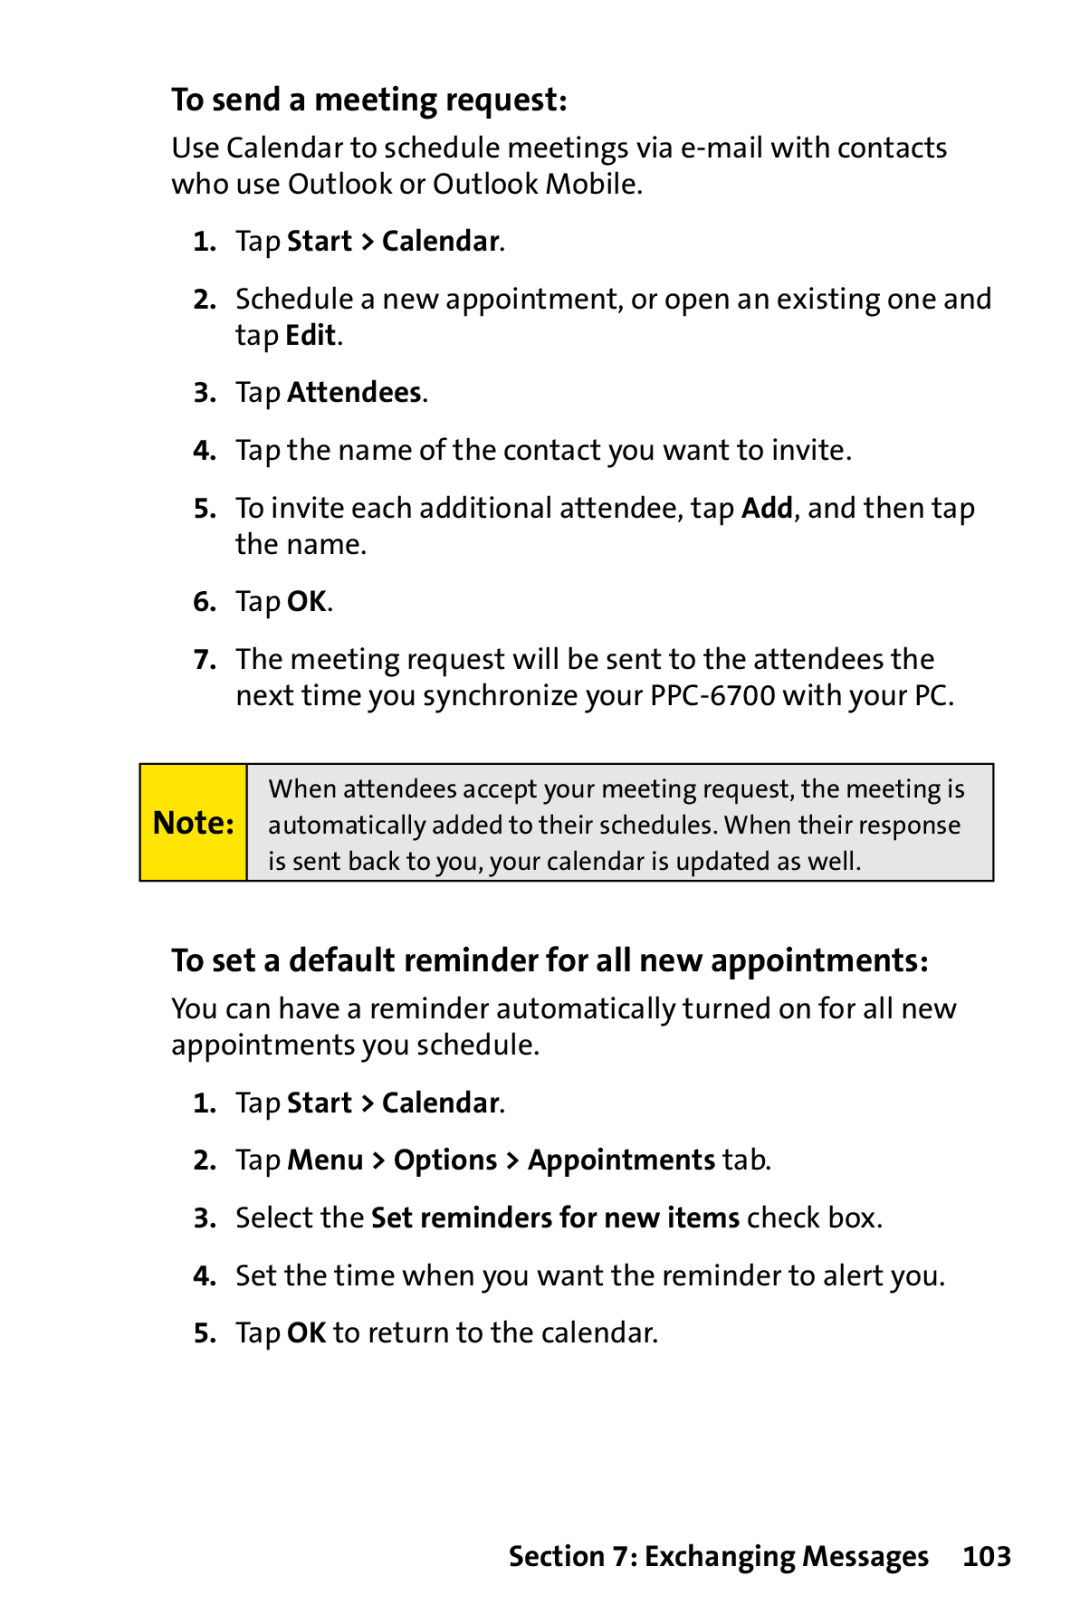 Sprint Nextel PPC-6700 To send a meeting request, To set a default reminder for all new appointments, Tap Start Calendar 